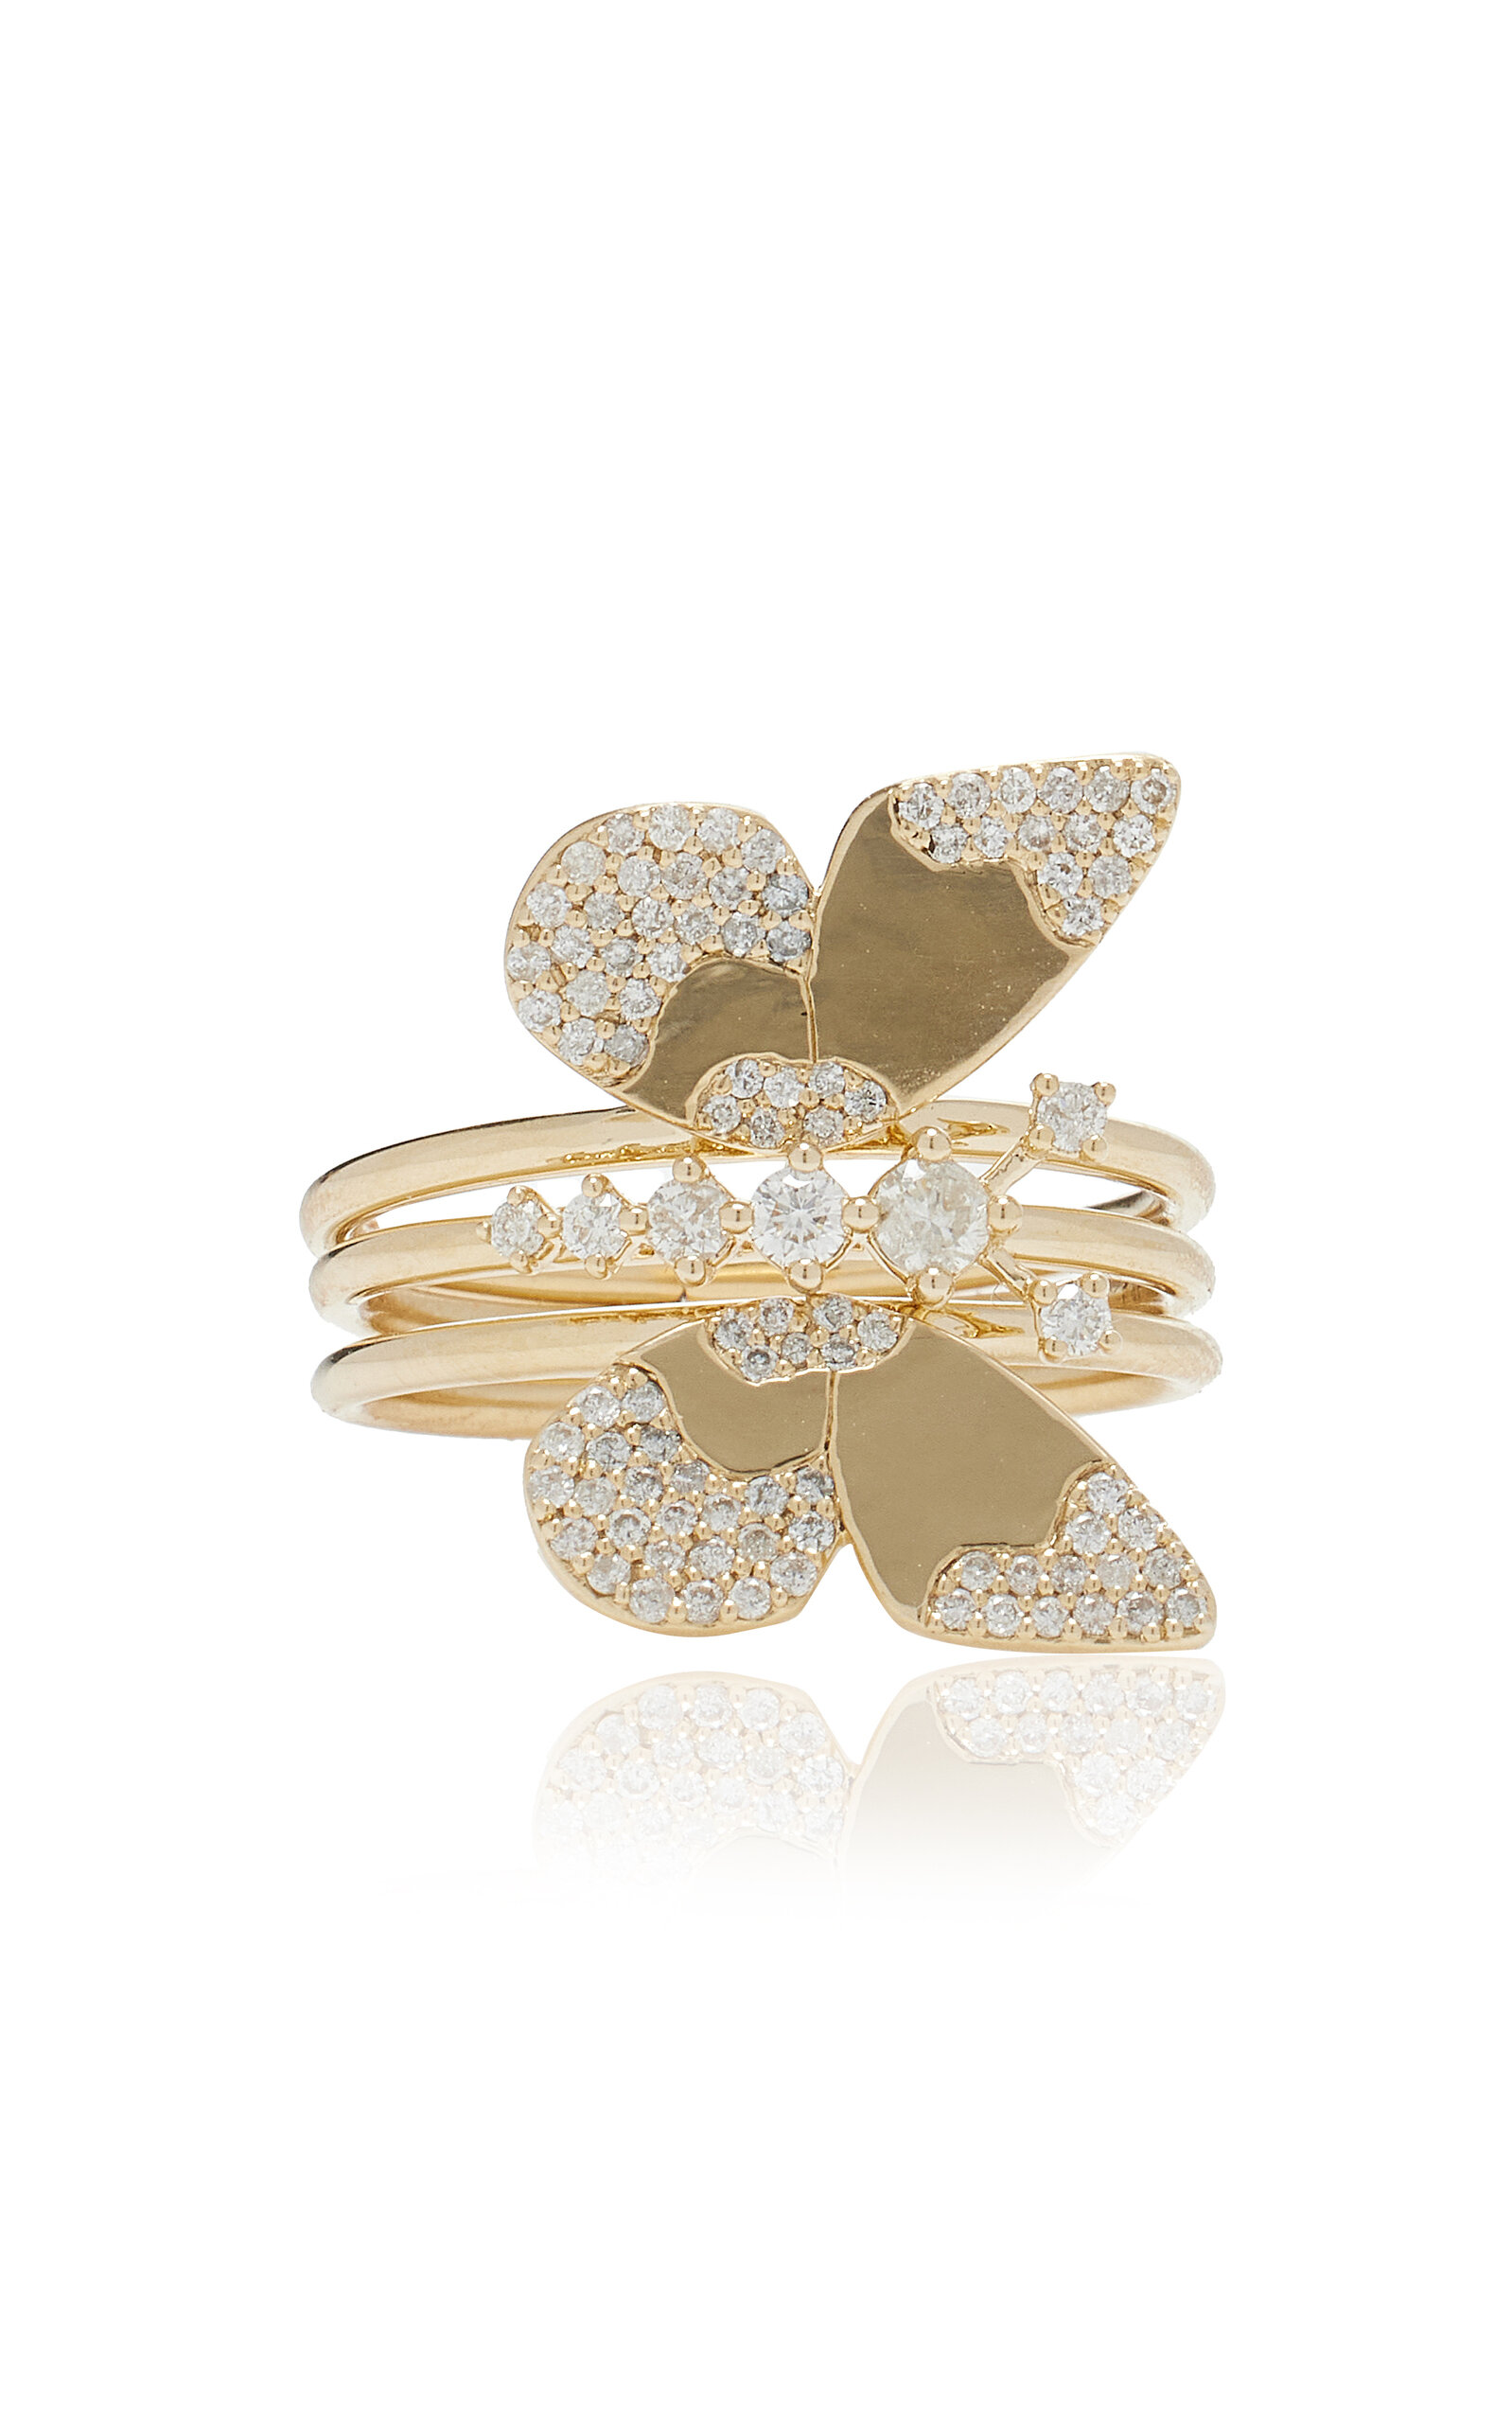 Enchanted Large Diamond Butterfly Ring Set